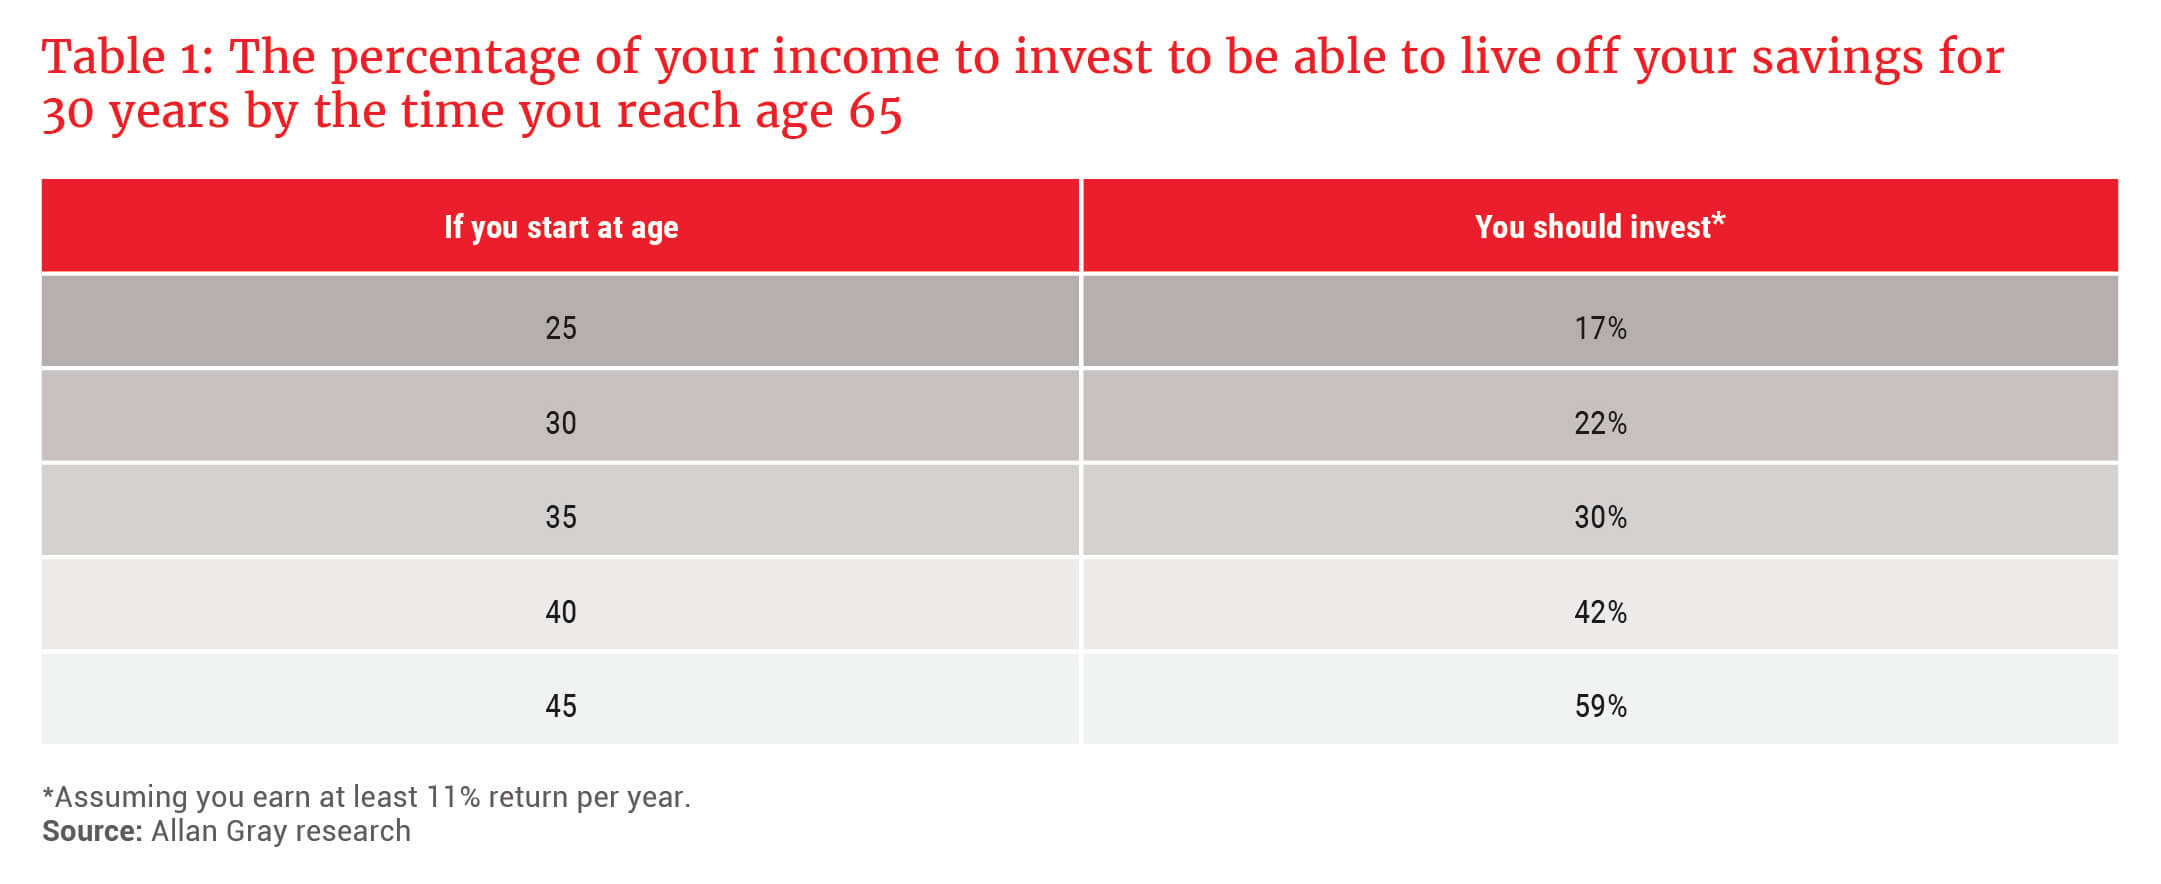 The percentage of your income to invest to be able to live off your savings for 30 years - Allan Gray  